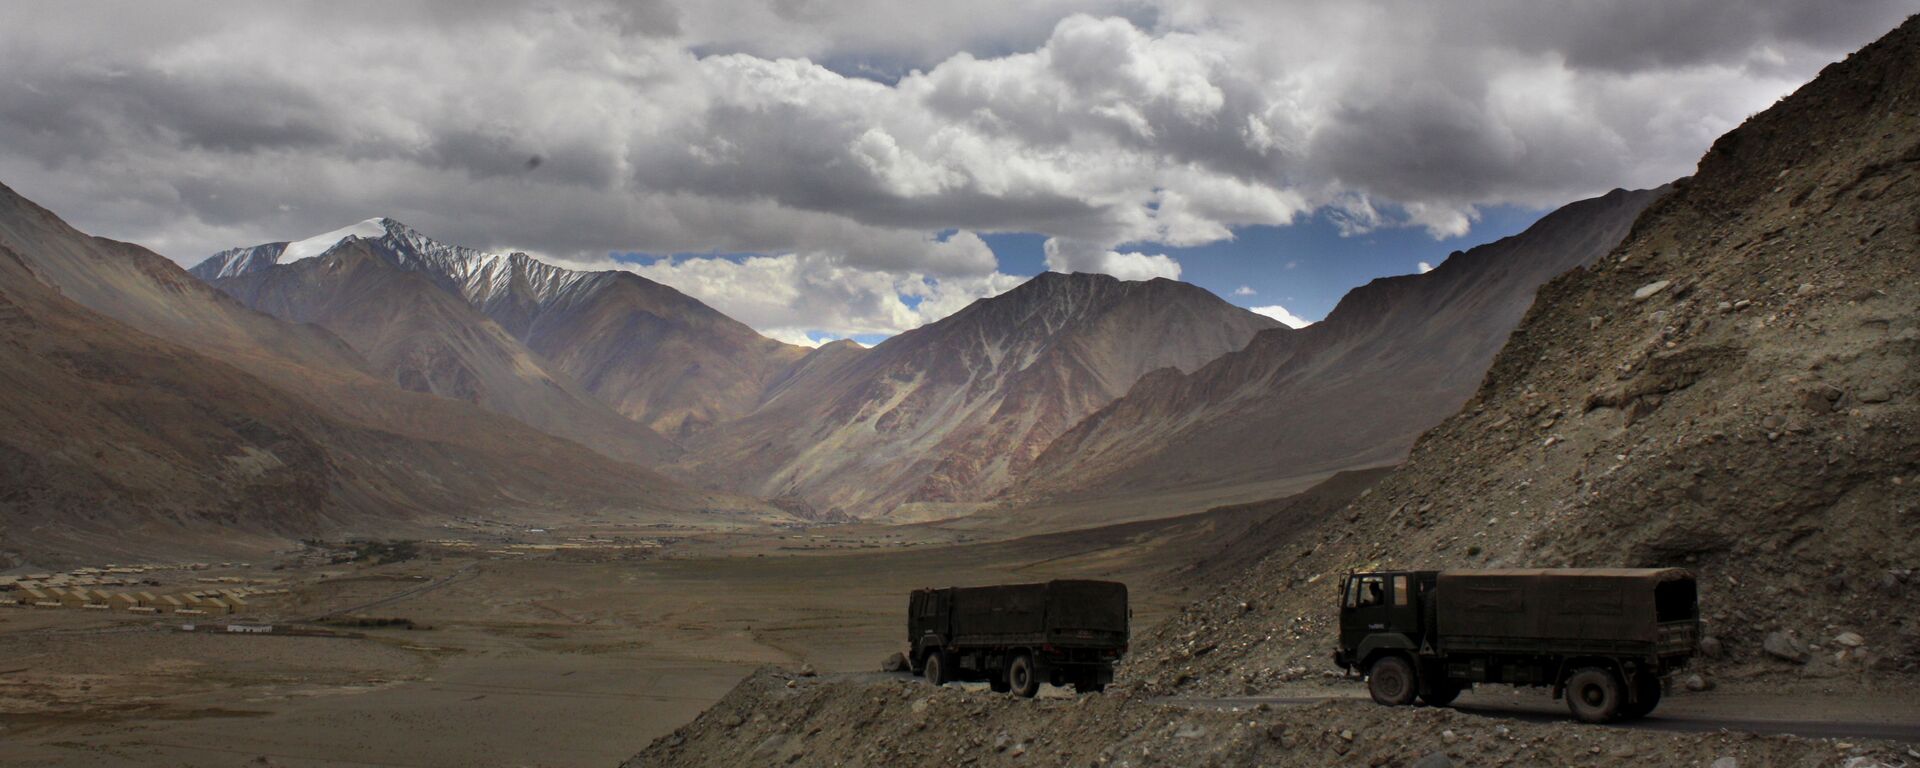 FILE- In this Sept. 14, 2017, file photo, Indian army trucks drive near Pangong Tso lake near the India China border in India's Ladakh area. The Indian army said Saturday, Jan. 9, 2020, that it has apprehended a Chinese soldier in the remote Ladakh region, where the two countries are locked in a monthslong military standoff along their disputed mountain border. An army statement said the Chinese soldier was taken into custody on Friday for transgressing into the Indian side in area South of Pangong Tso lake. (AP Photo/Manish Swarup) - Sputnik International, 1920, 06.08.2021